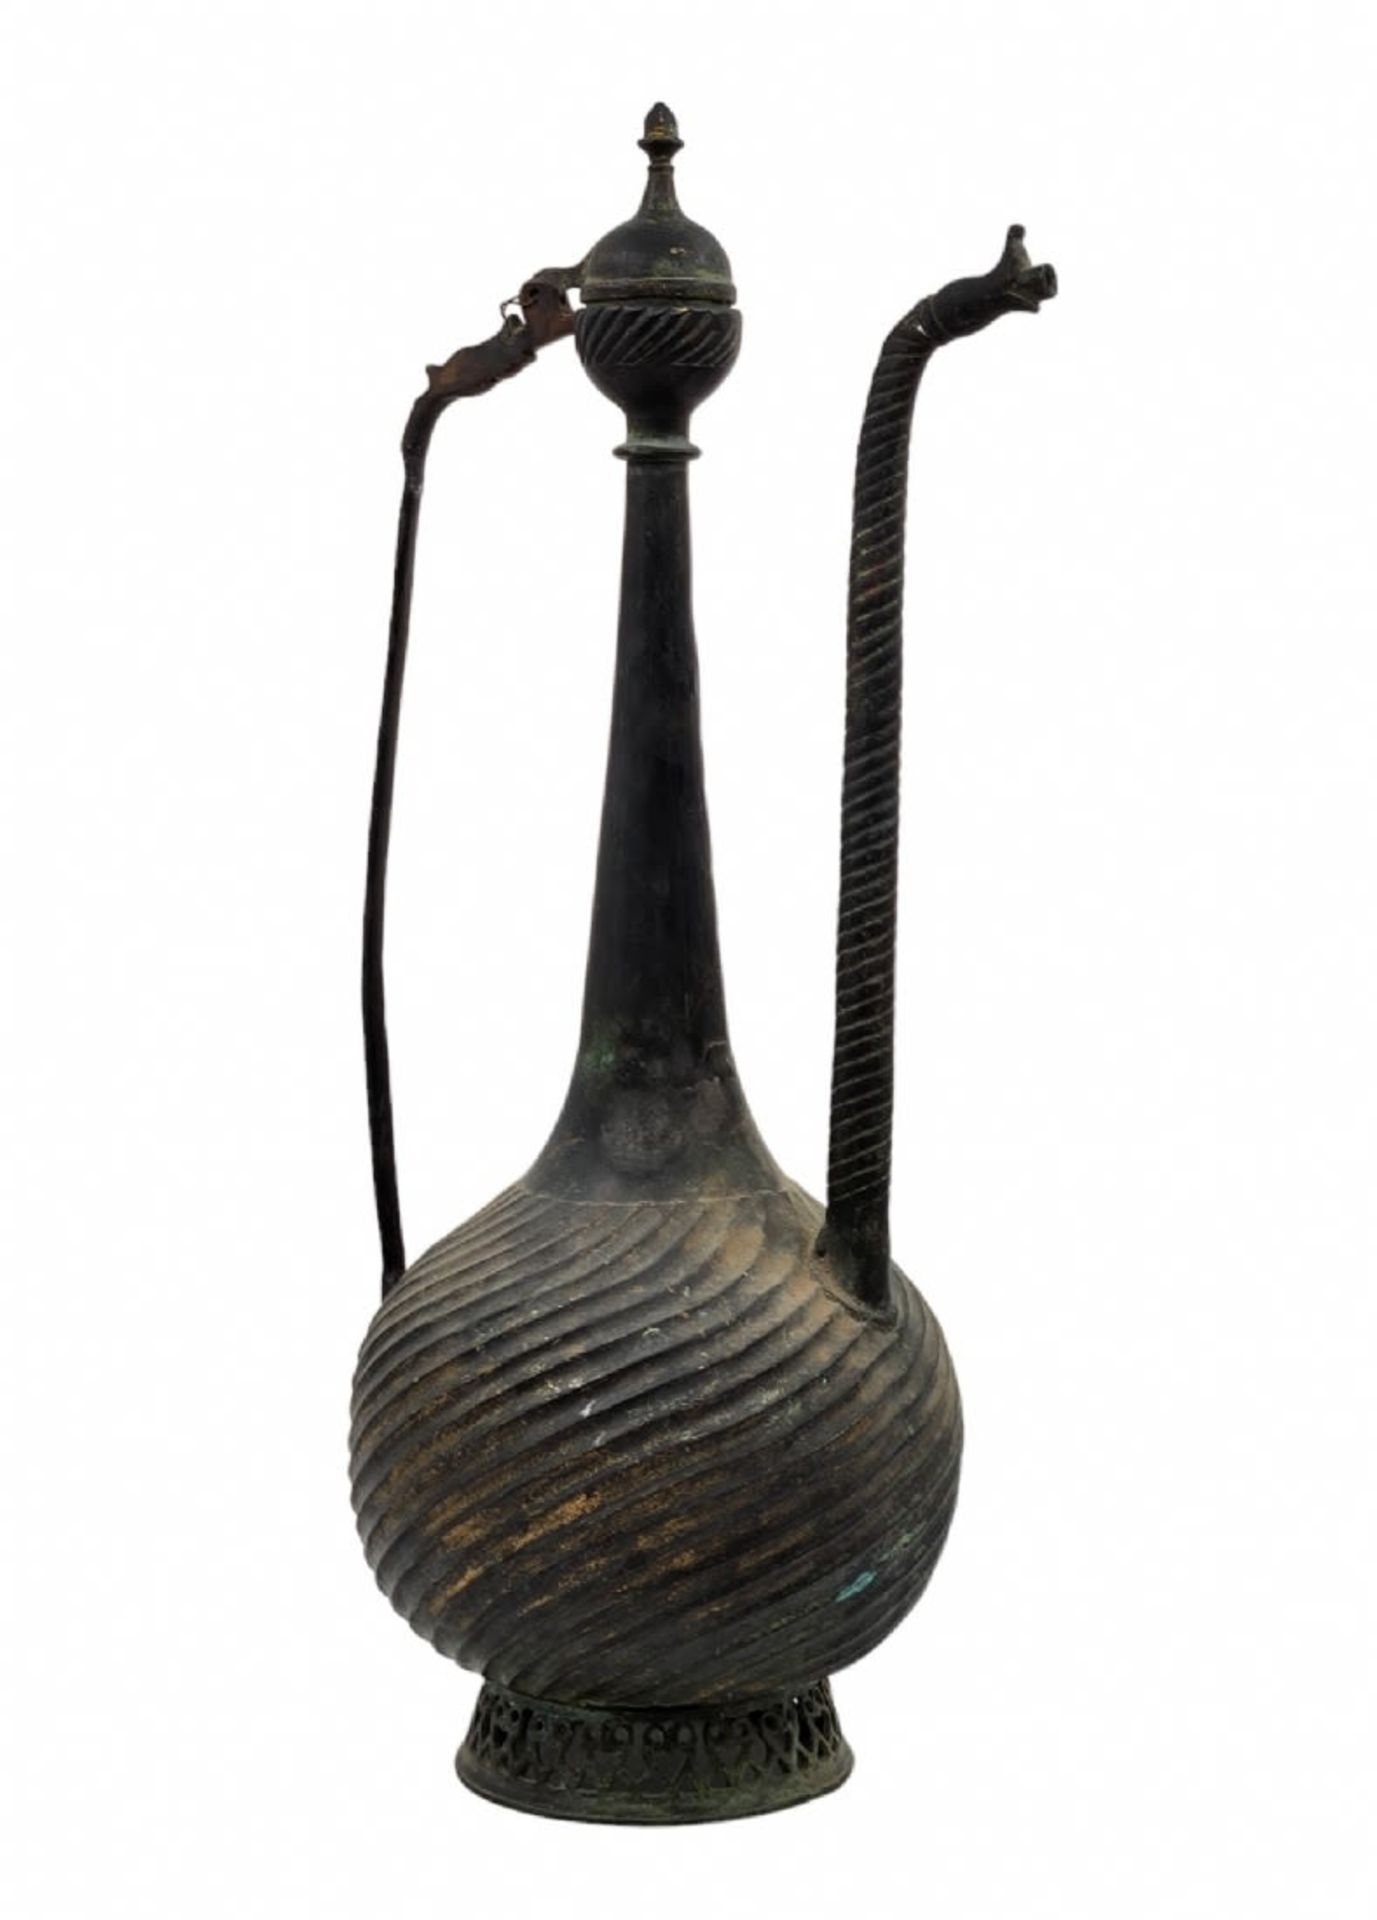 Chinese jug made of blackened brass, made in the style of ancient Indian jugs of first half of the - Bild 2 aus 5